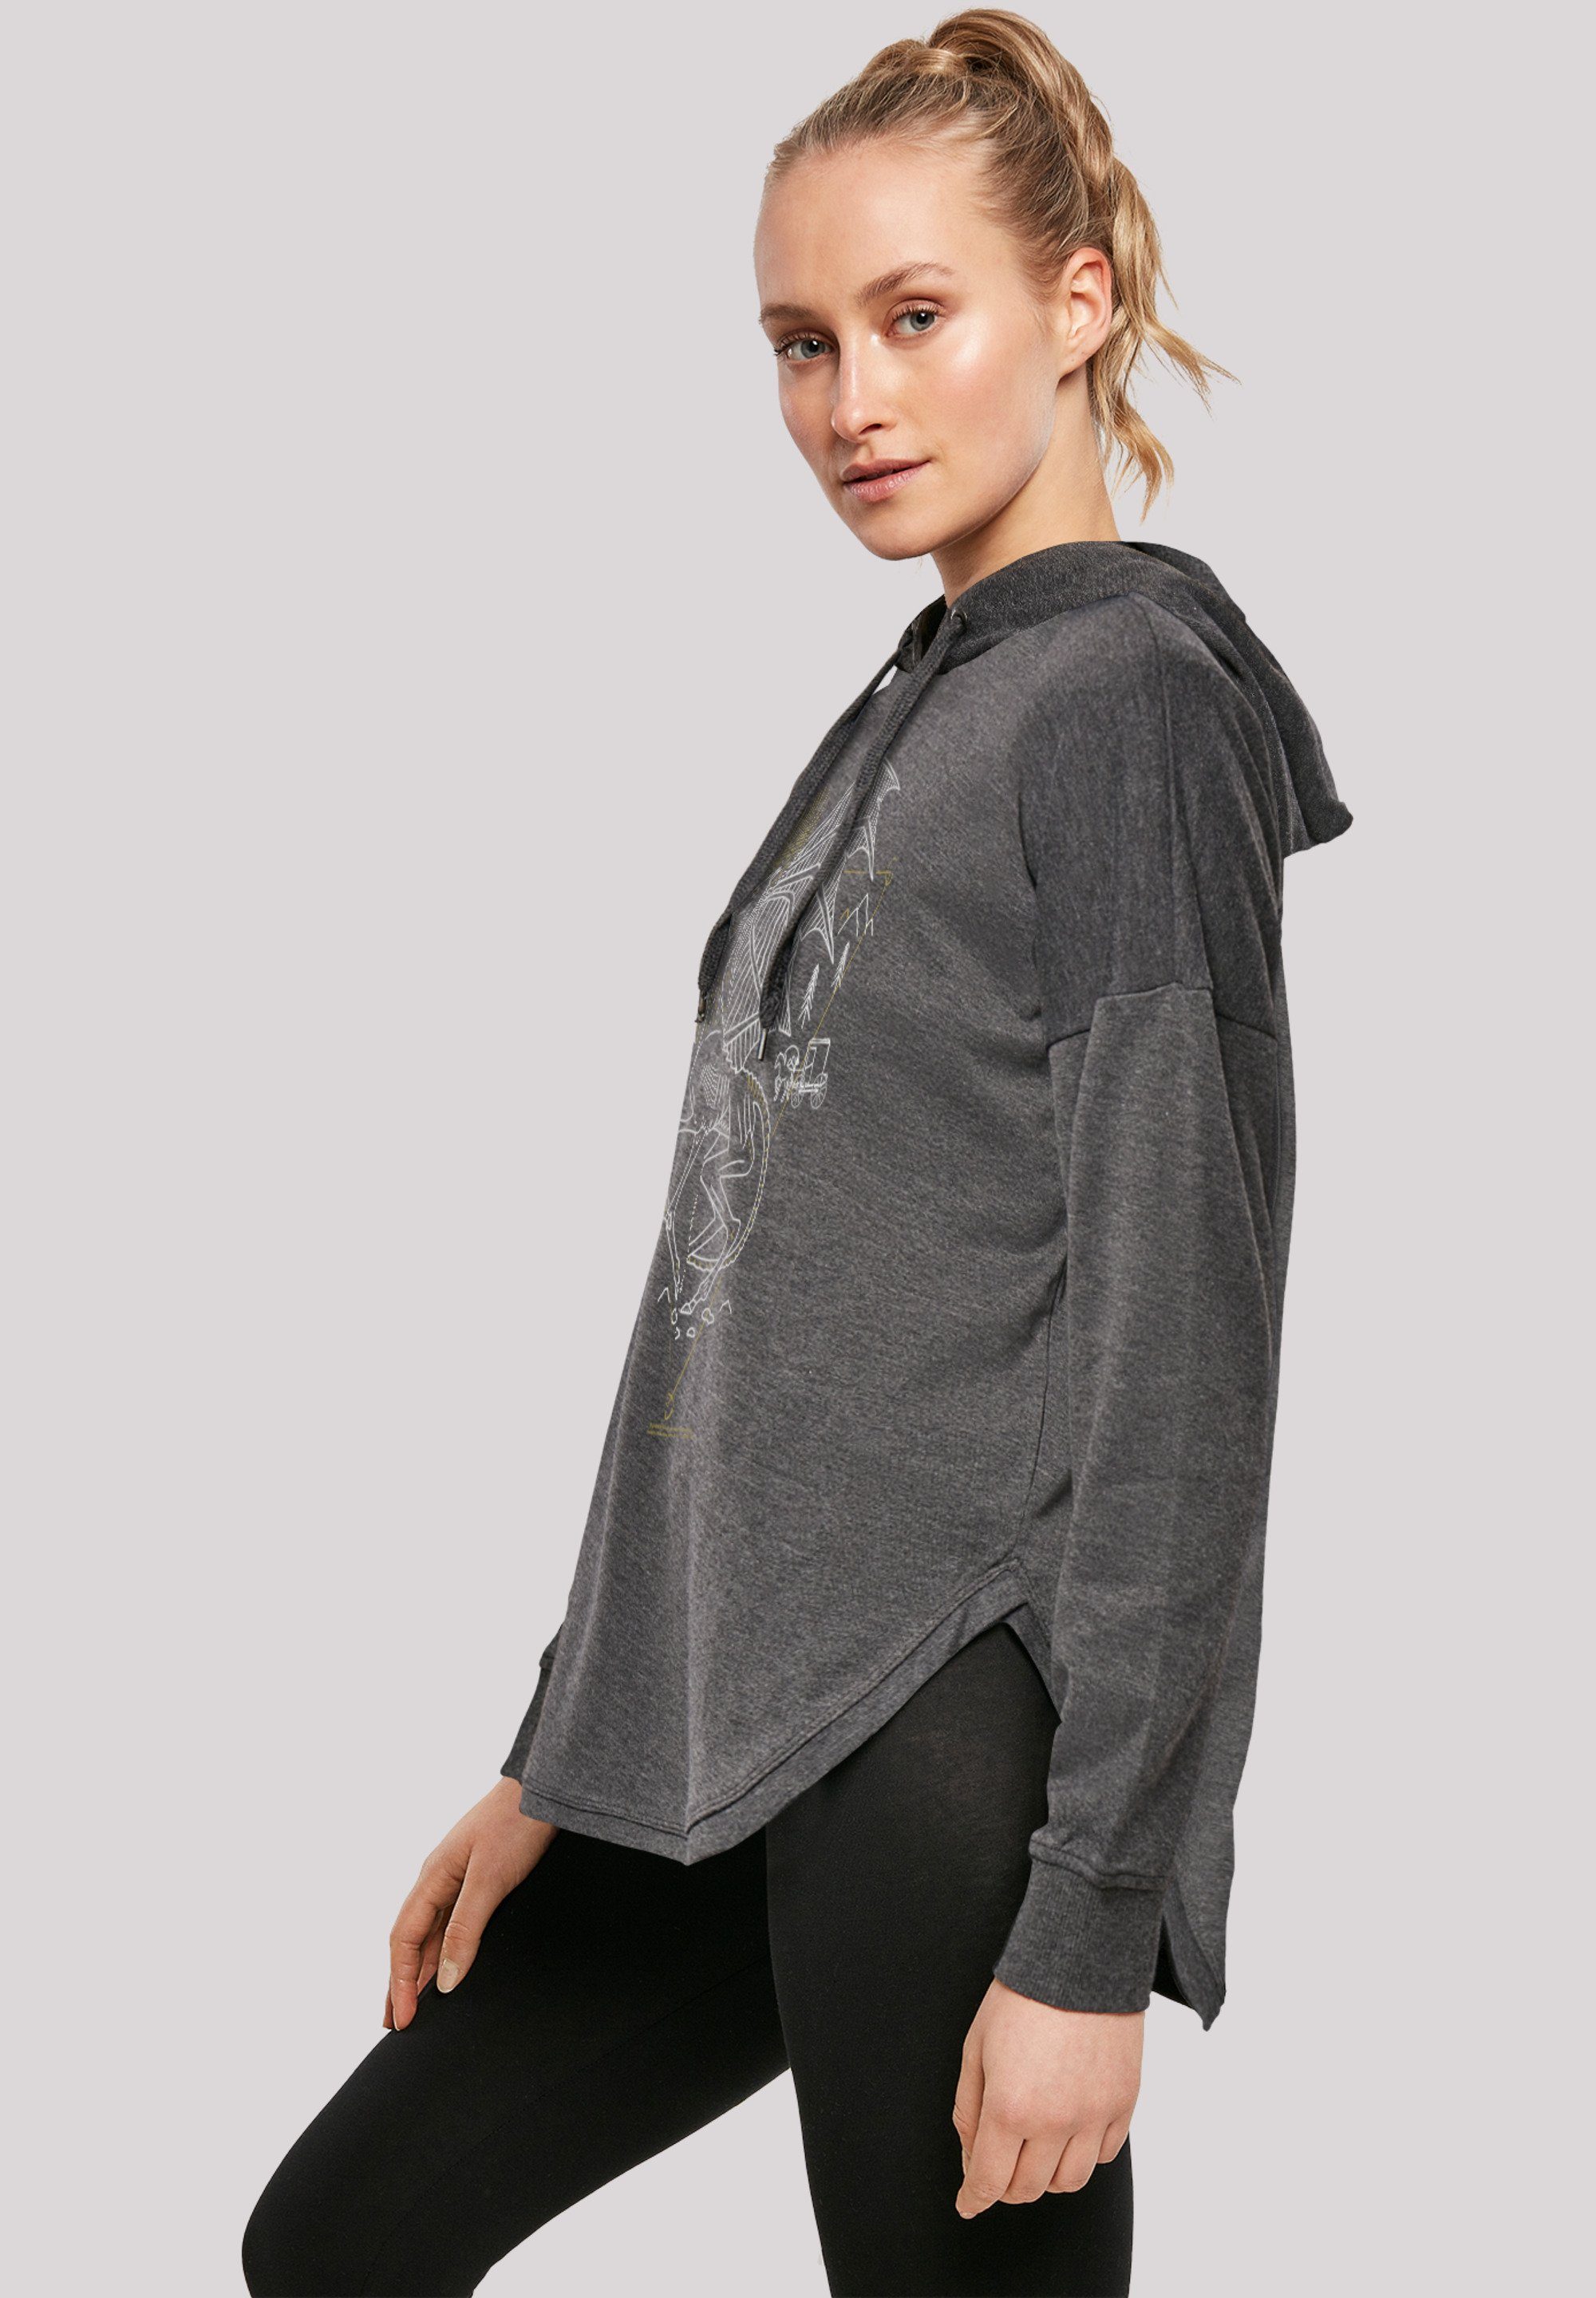 Harry F4NT4STIC Hoody with Thestral Potter (1-tlg) Line Oversized Kapuzenpullover Ladies charcoal Damen Art